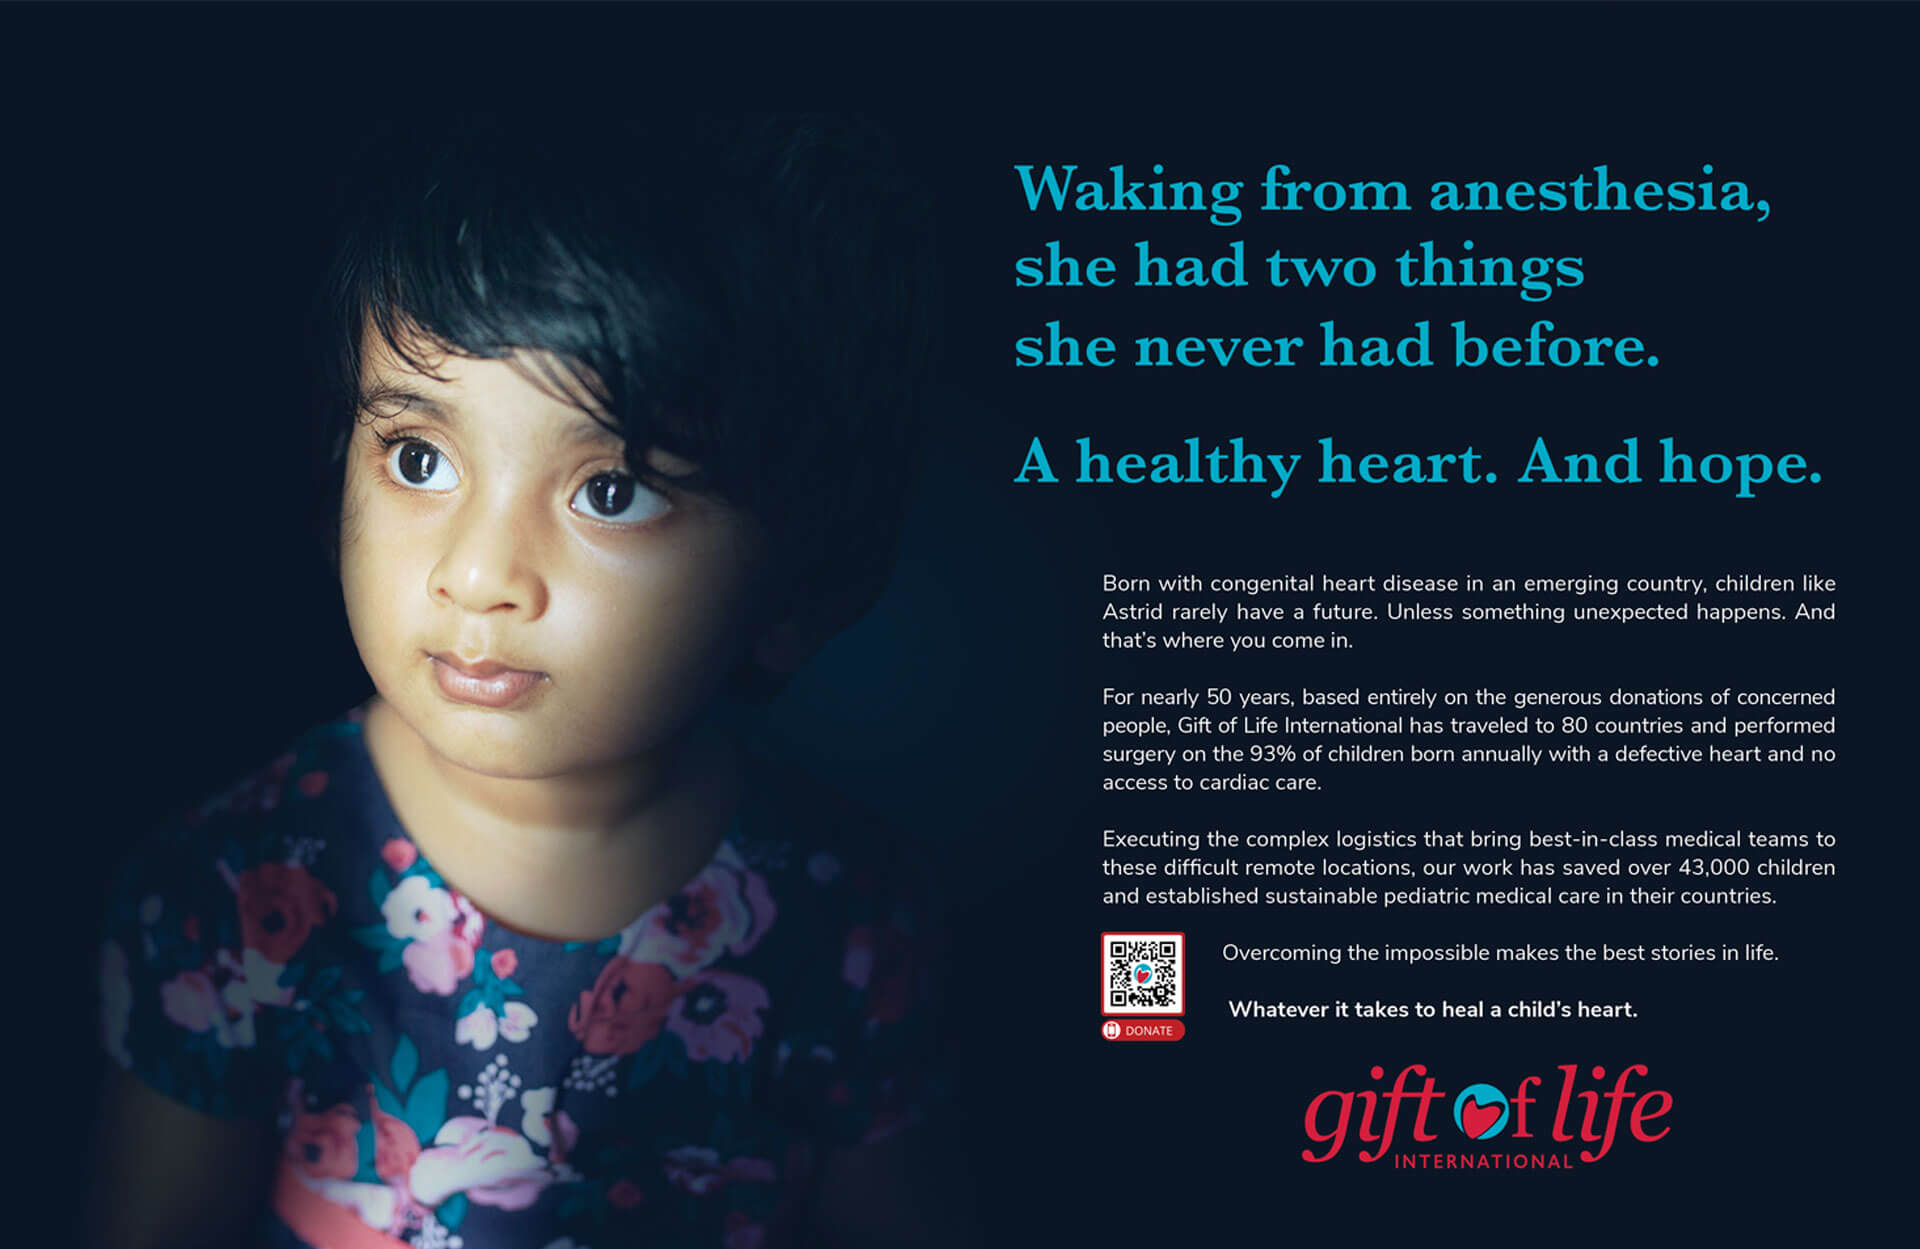 Gift of Life. A healthy heart. And hope. Ad